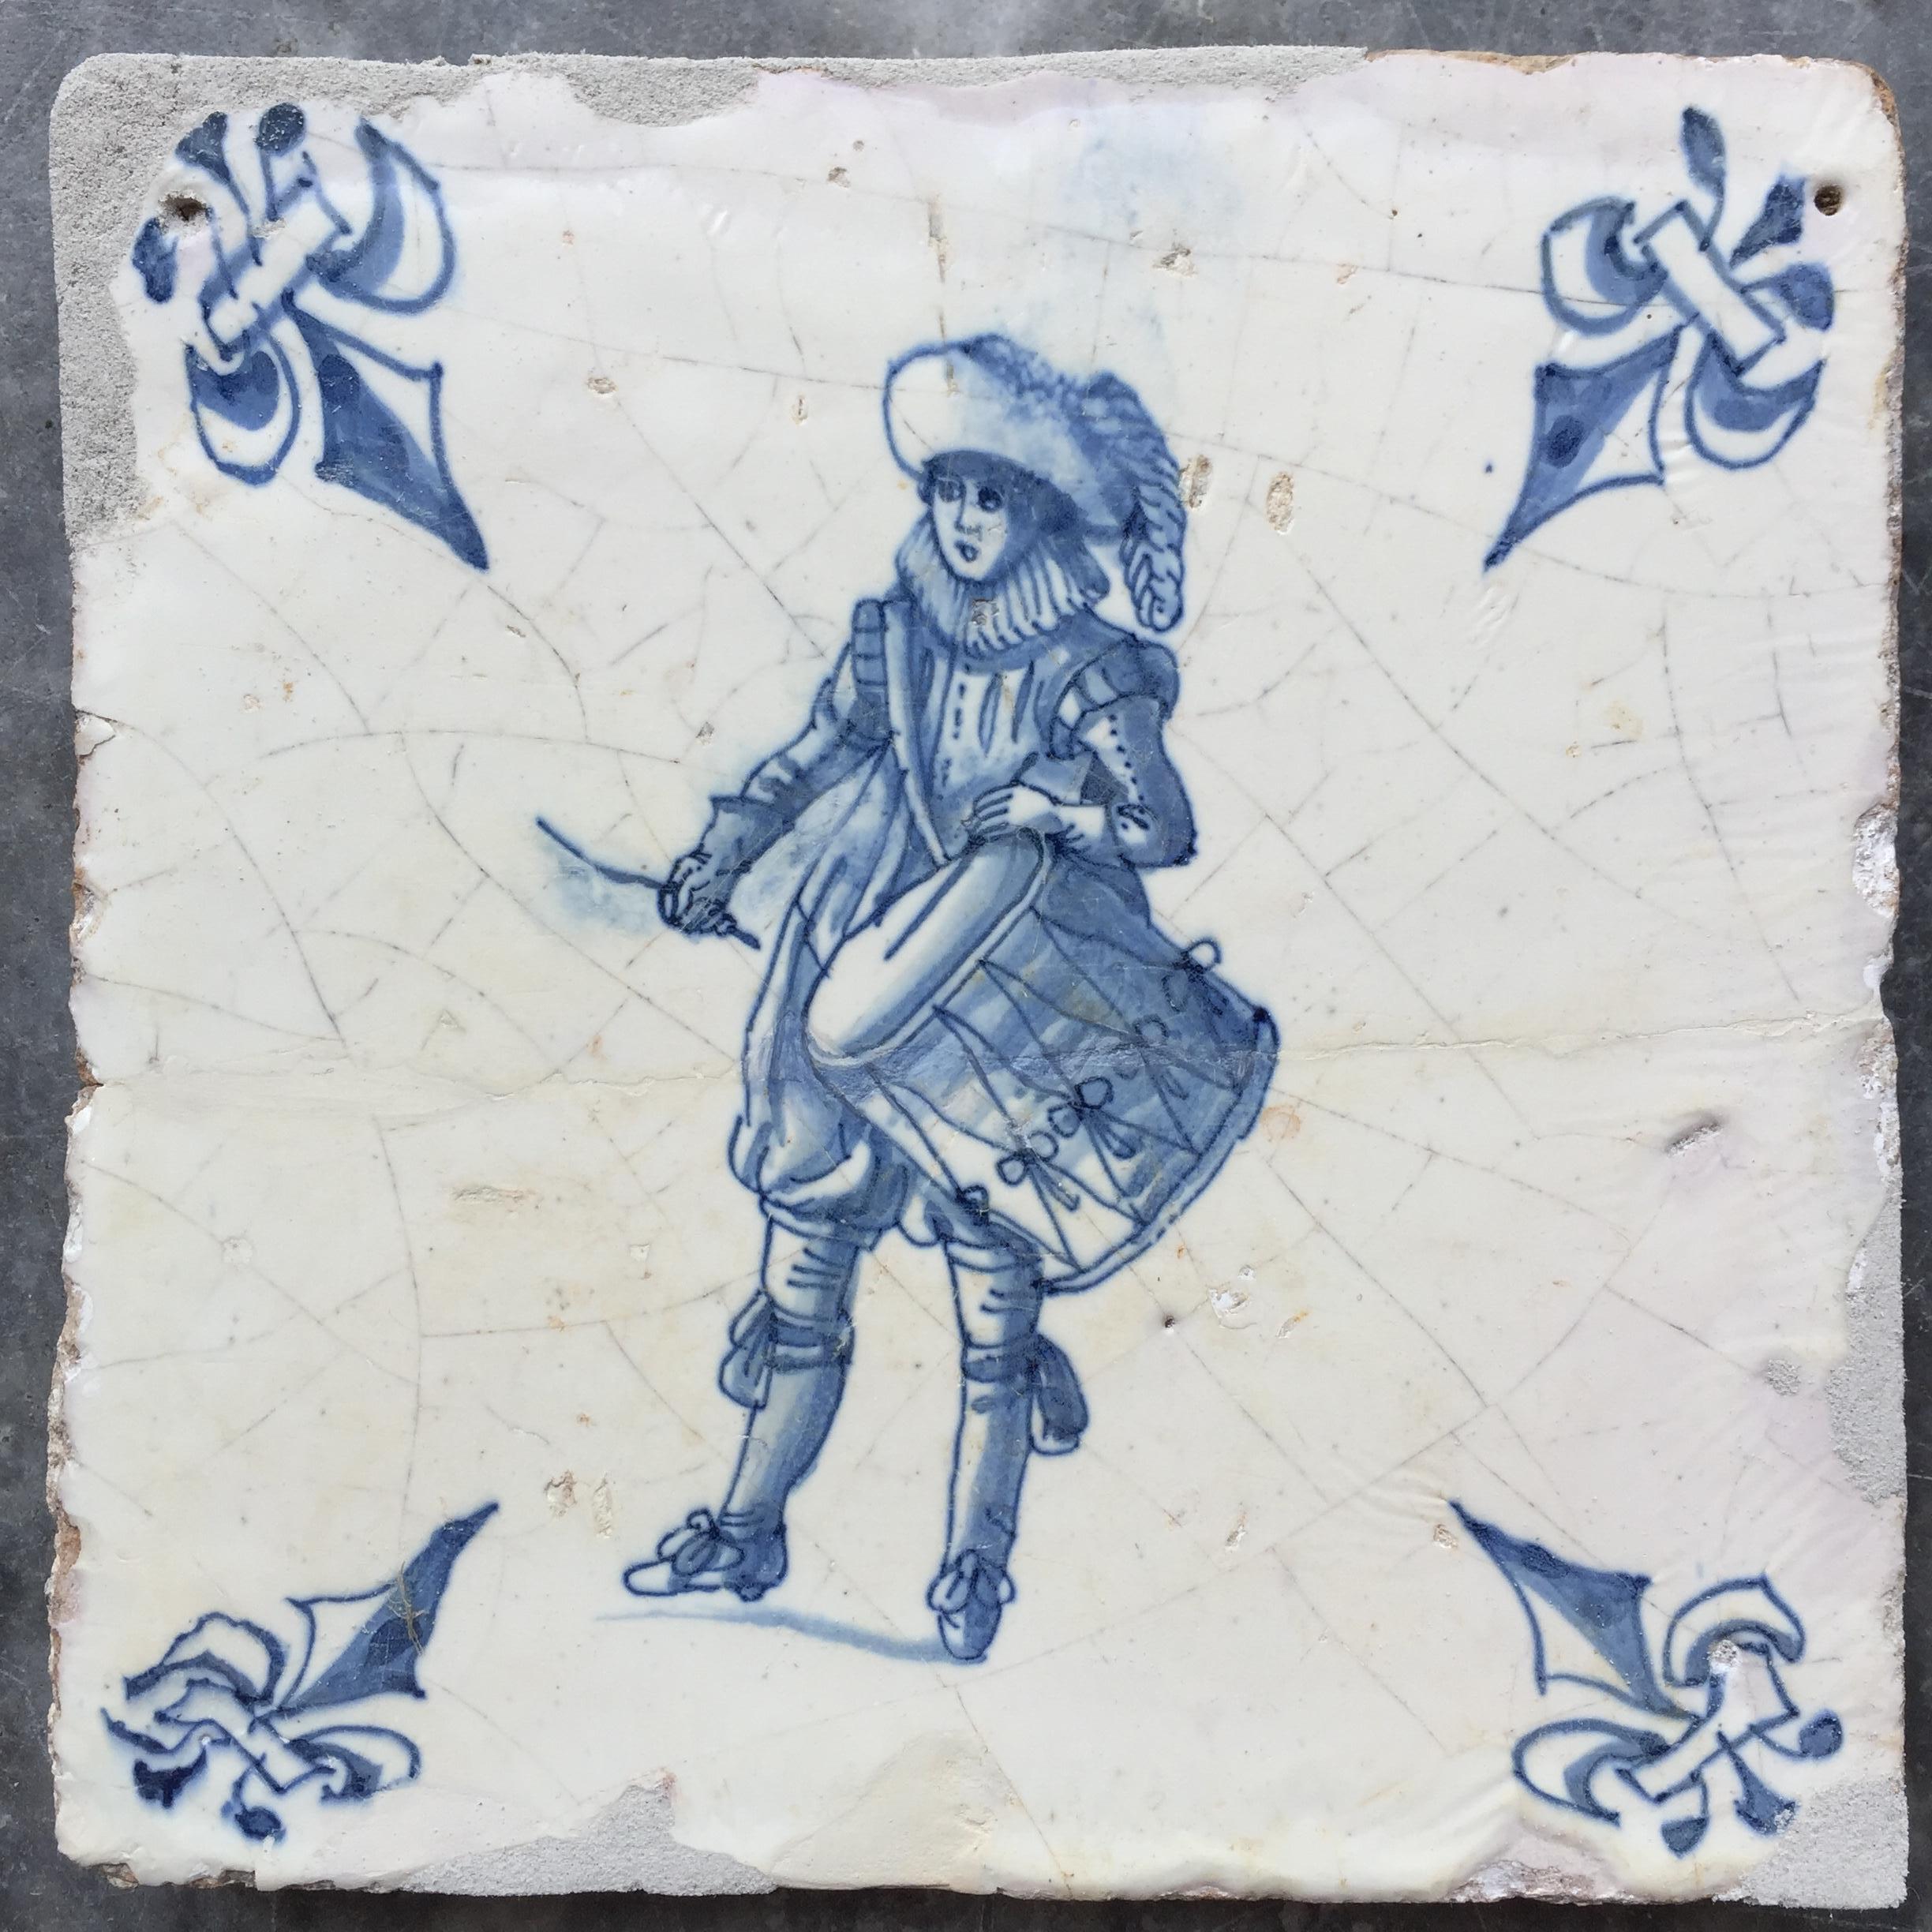 Glazed Exceptional Set of 20 Blue and White Dutch Delft Tiles with Figures